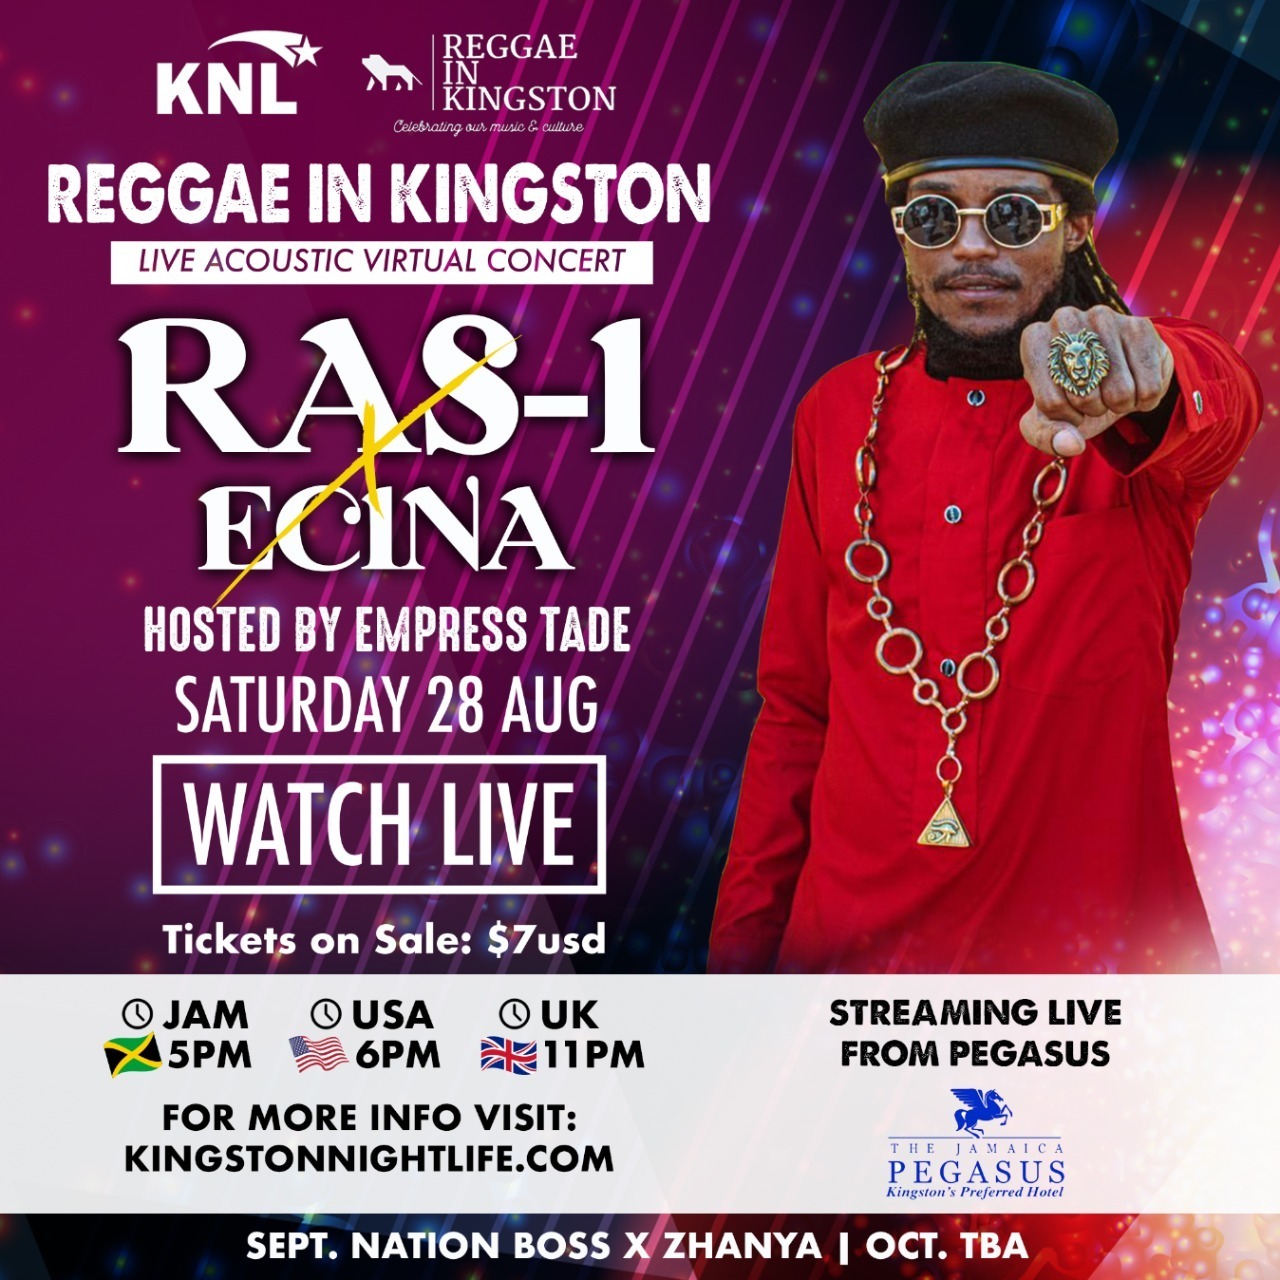 Reggae in Kingston - Celebrating our music and culture.